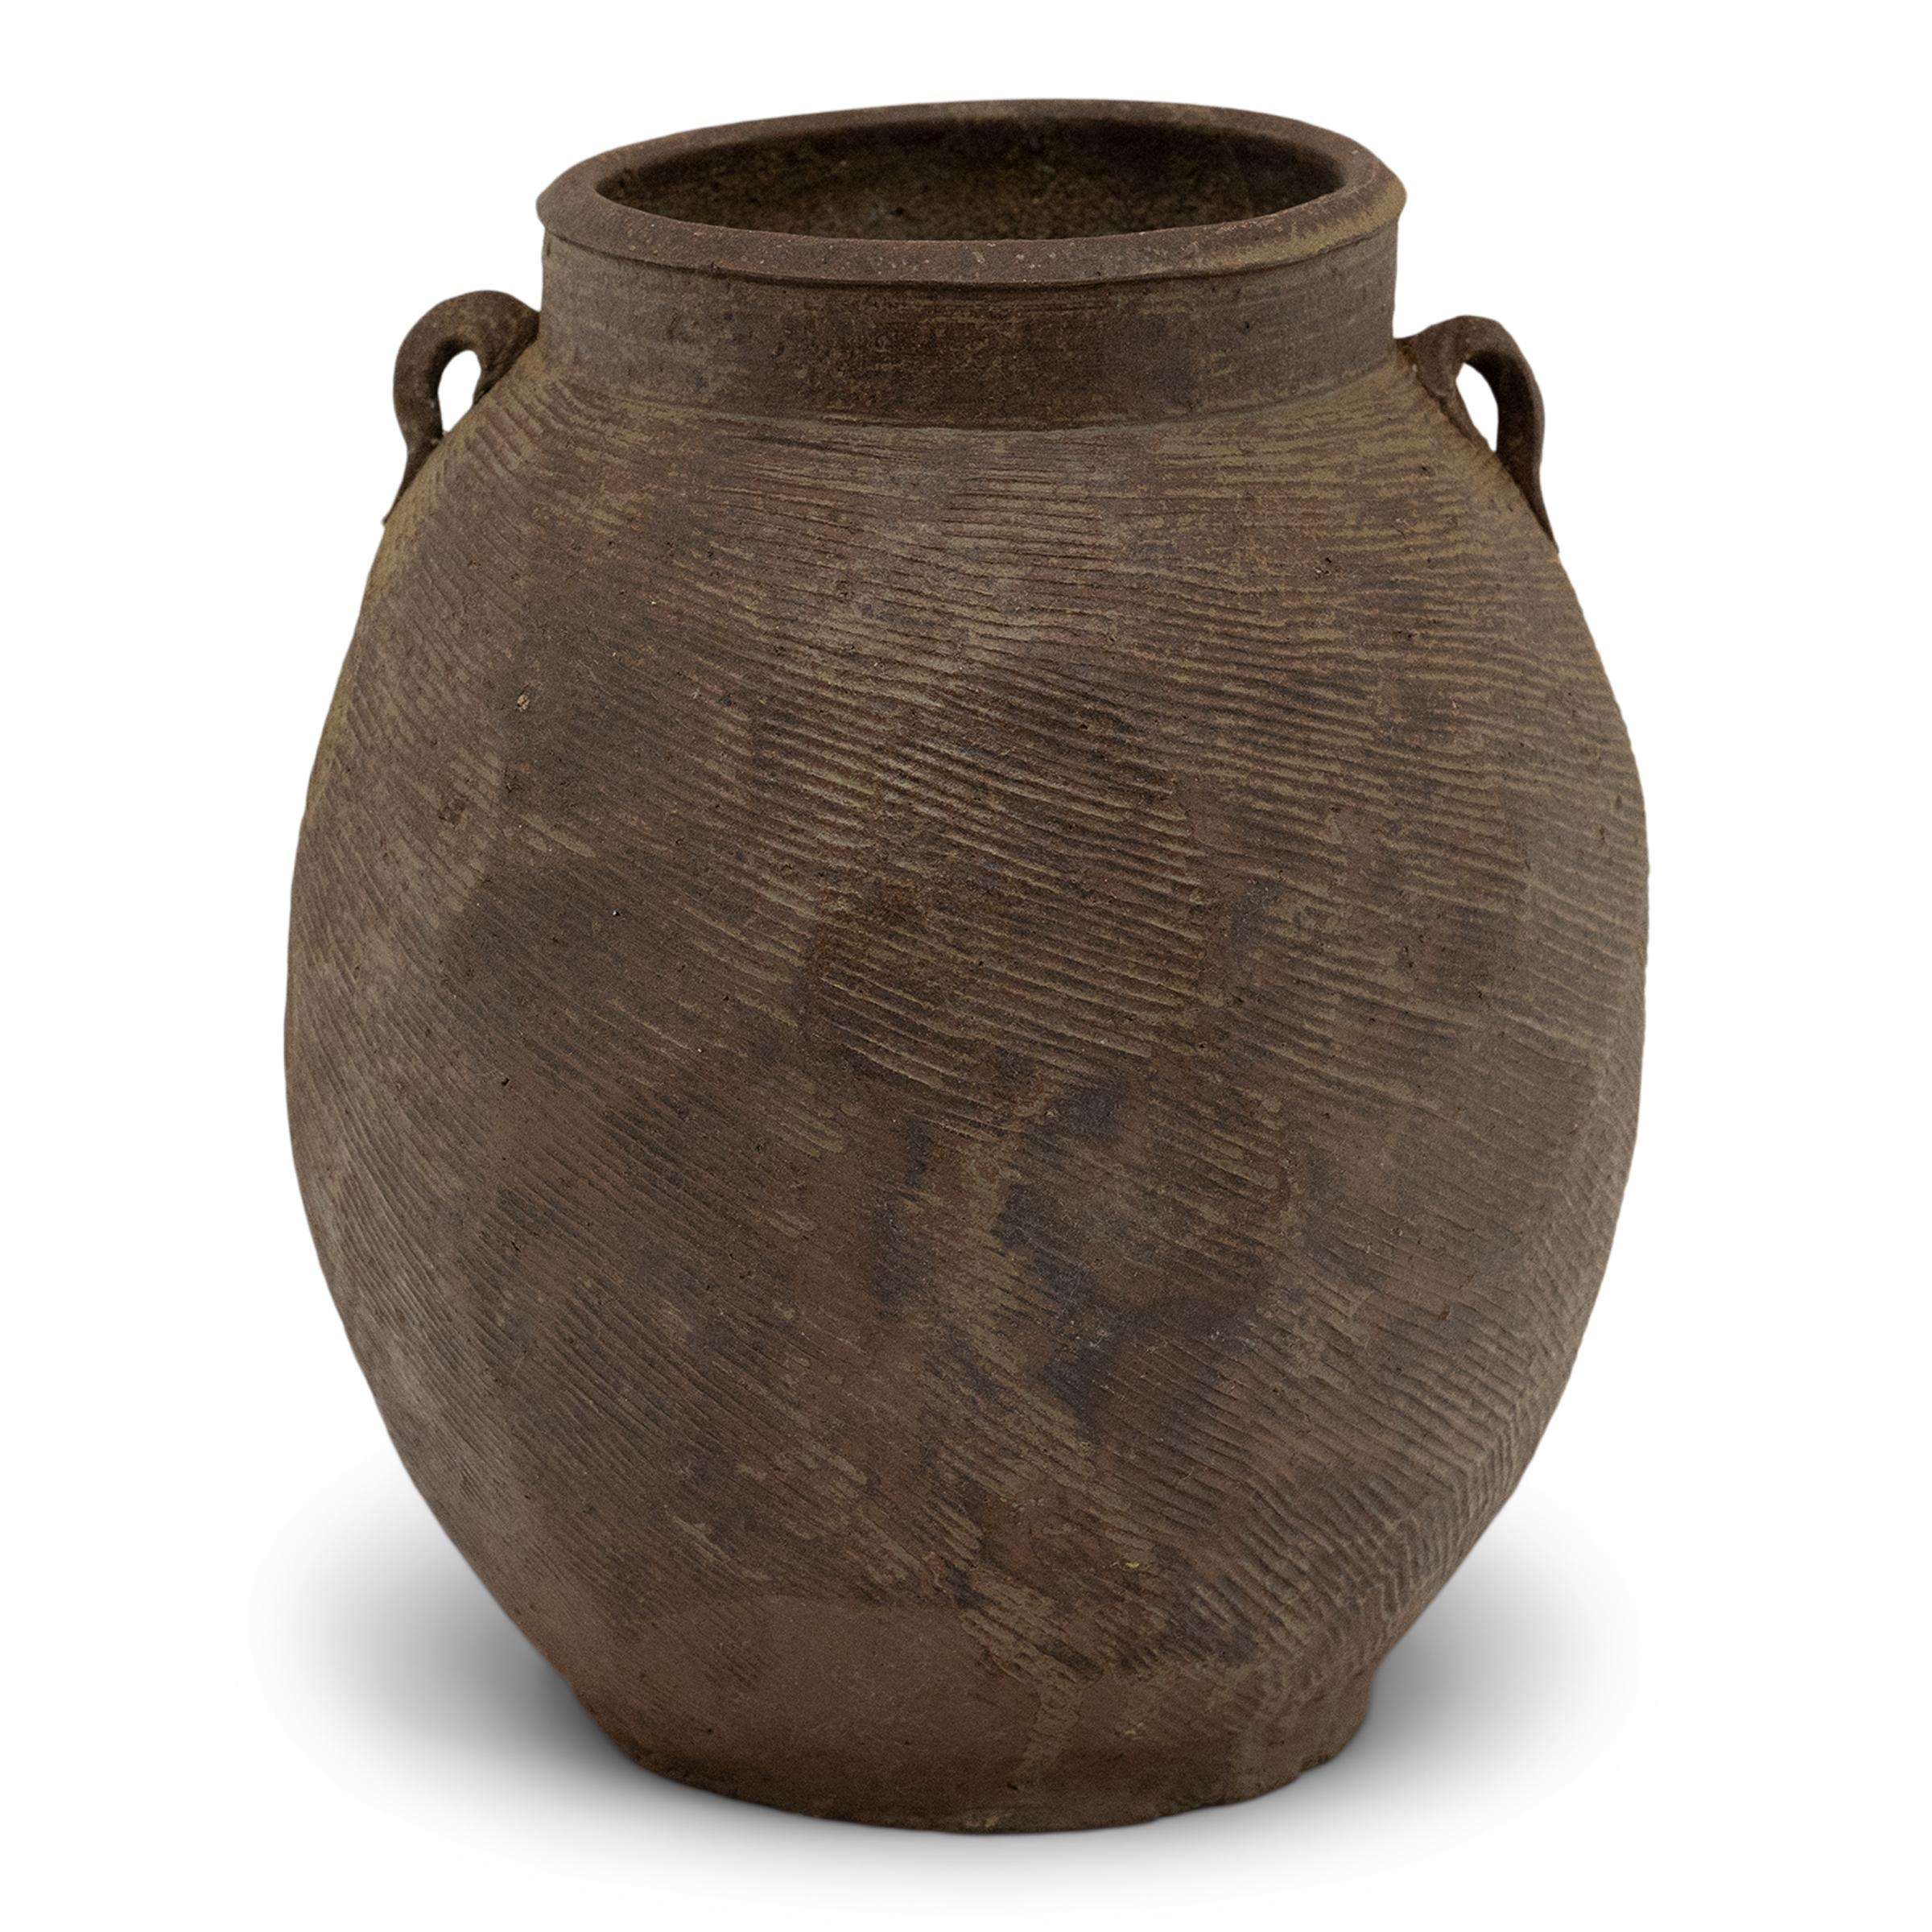 Cloaked in a beautifully irregular brown slip finish, this 19th-century earthenware pot was charged with the humble task of storing dry goods in a Qing dynasty kitchen. The lobed pot has a round form with a narrow base and a tall neck flanked by two